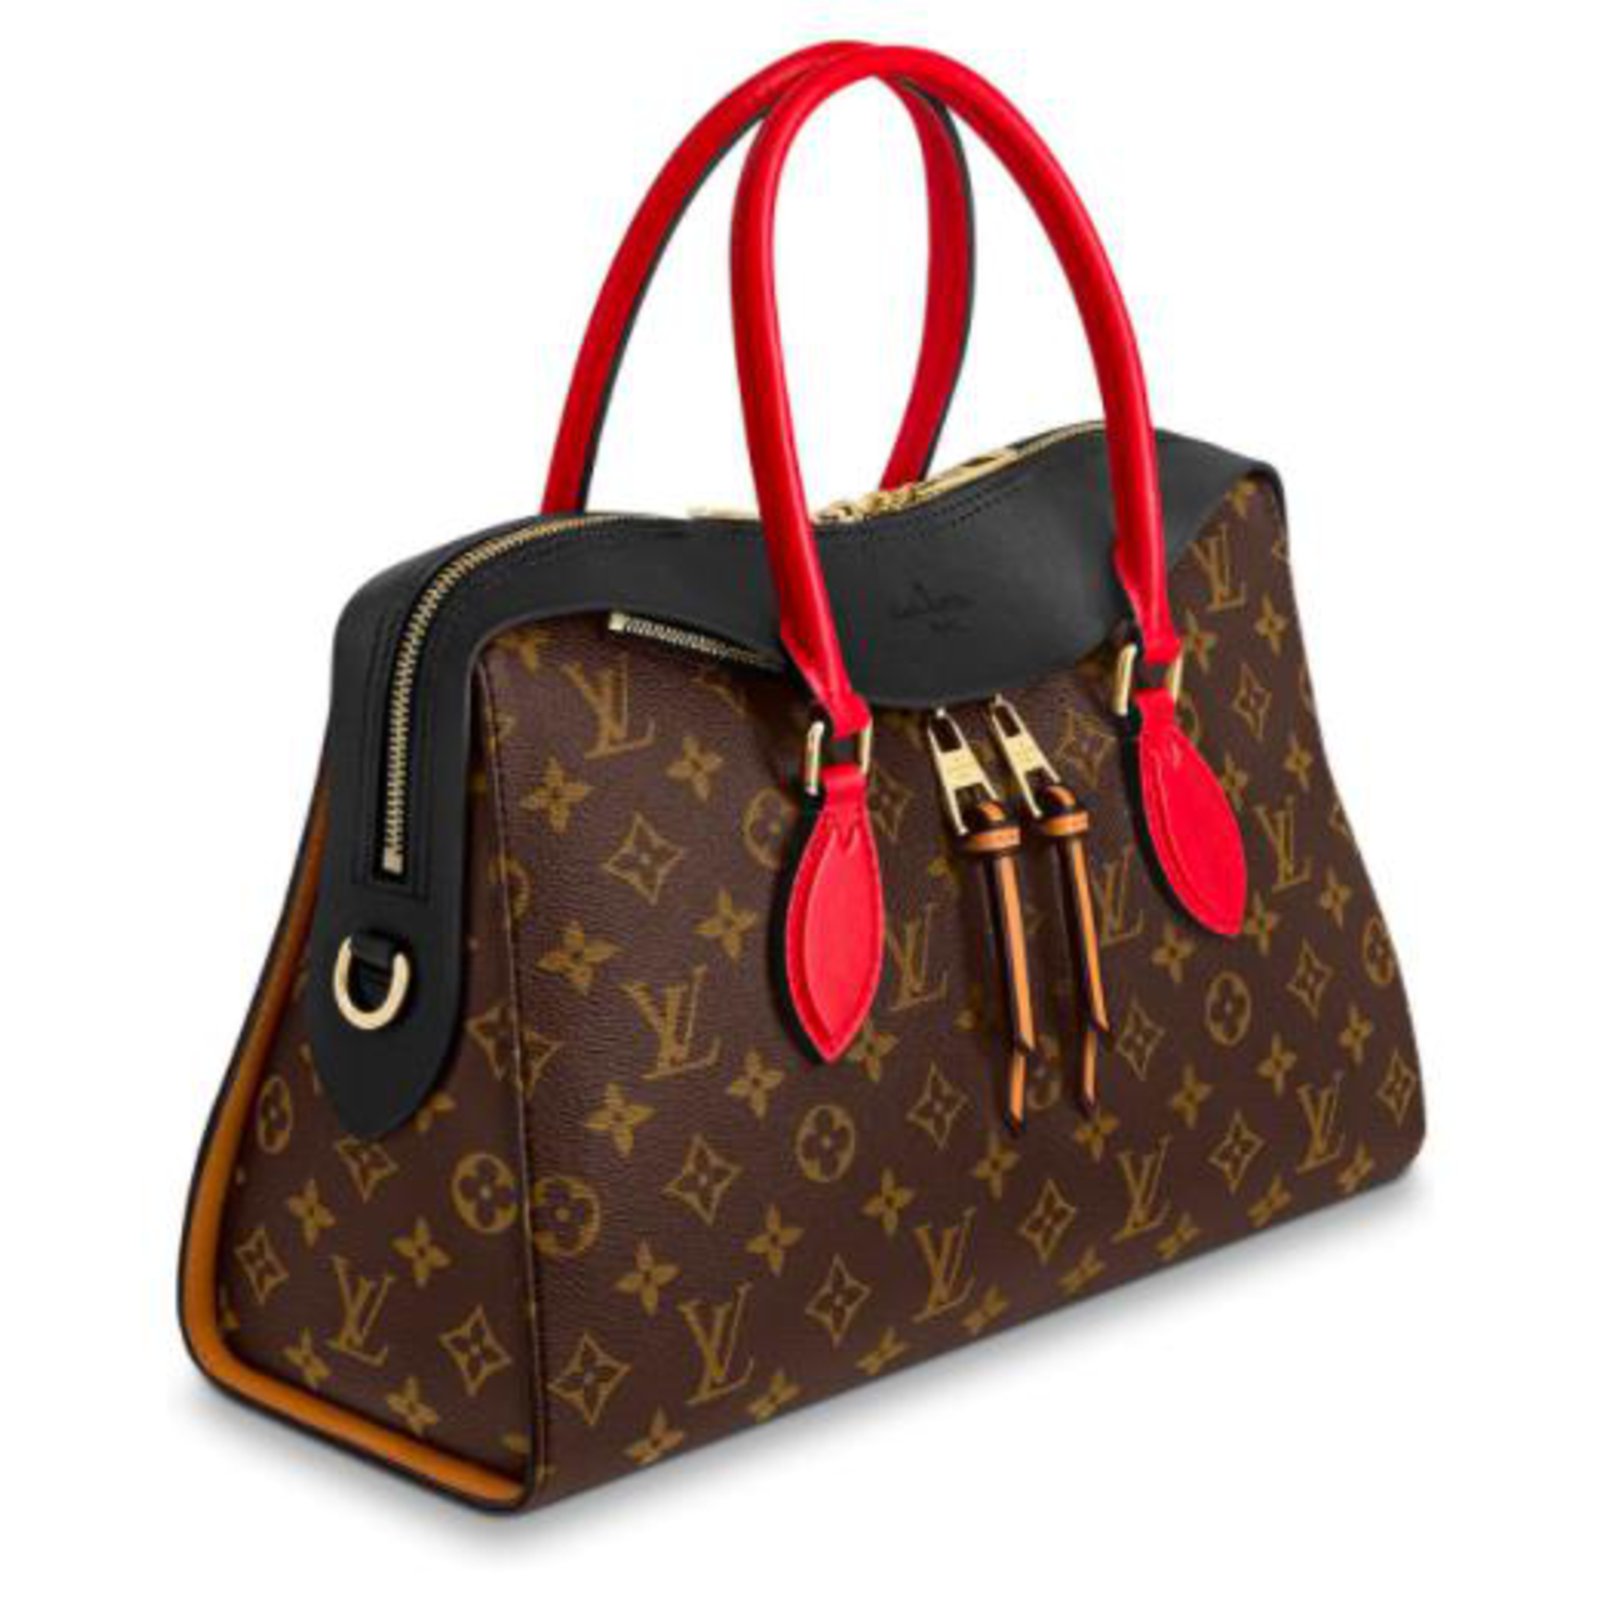 New Louis Vuitton Monogram Tuileries Unboxing & Review - January